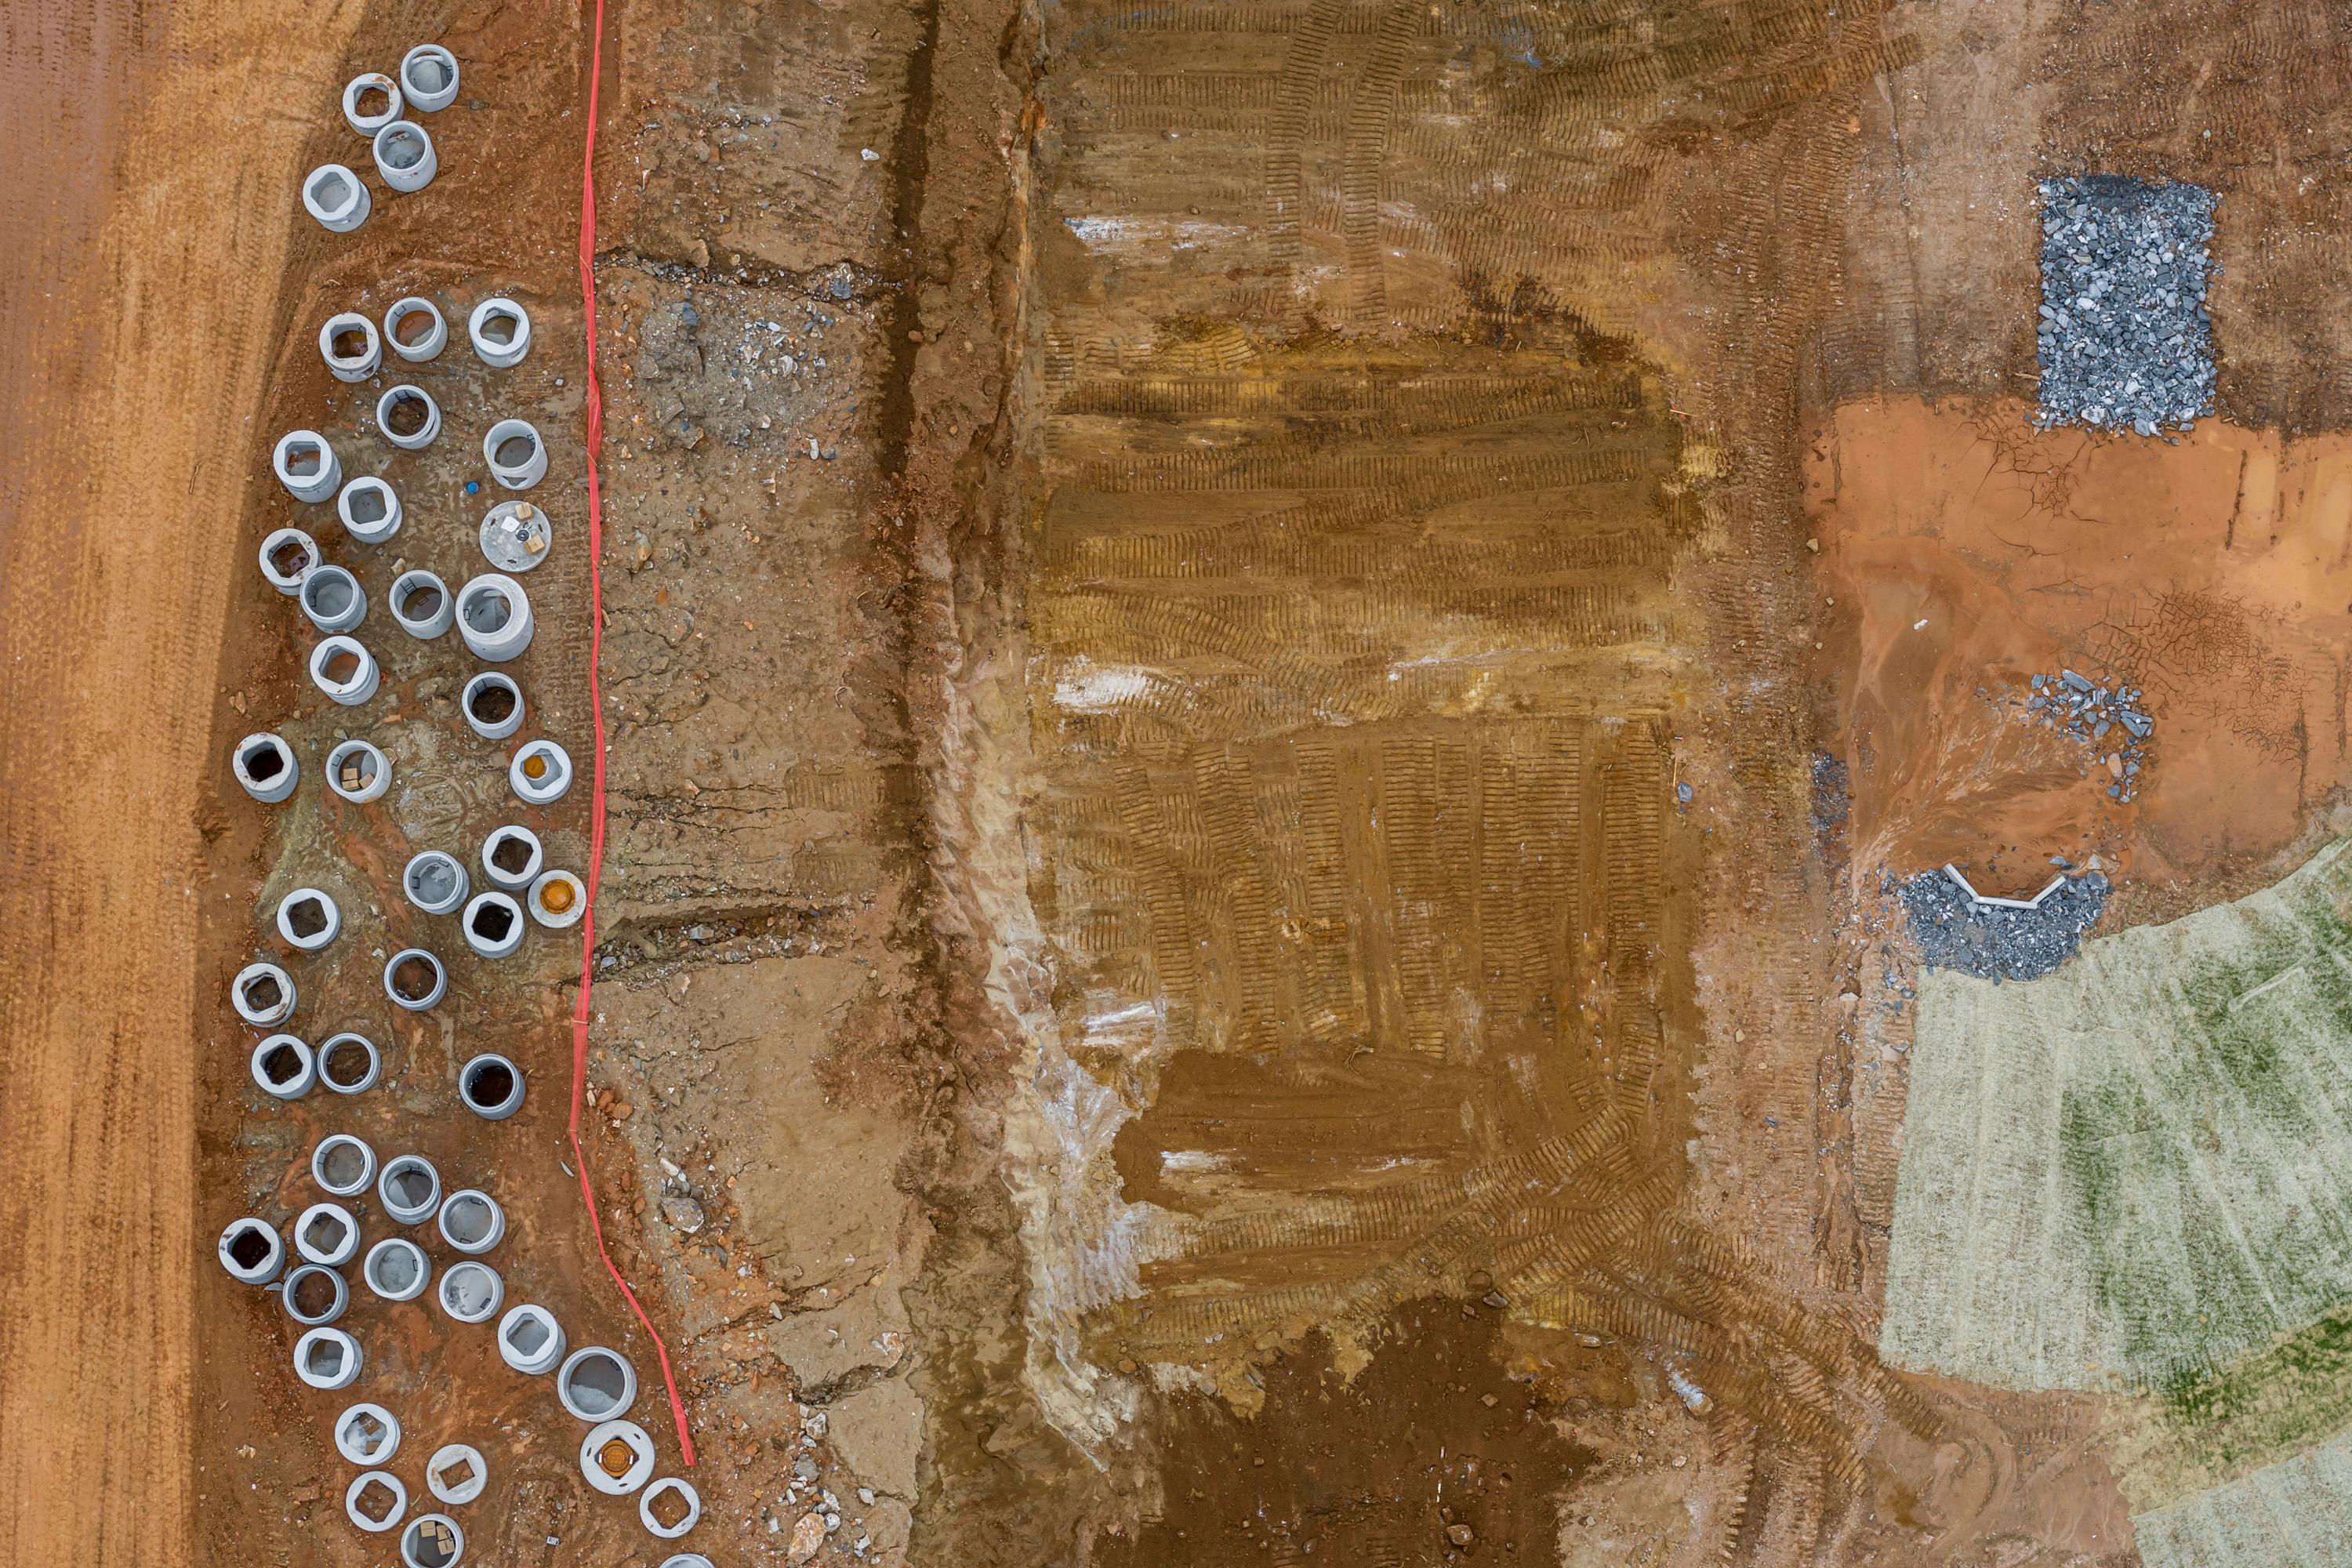 Peter Essick Abstract Photograph - "Construction Site, Snellville, GA #4" Aerial Landscape Photography, Ansel Adams